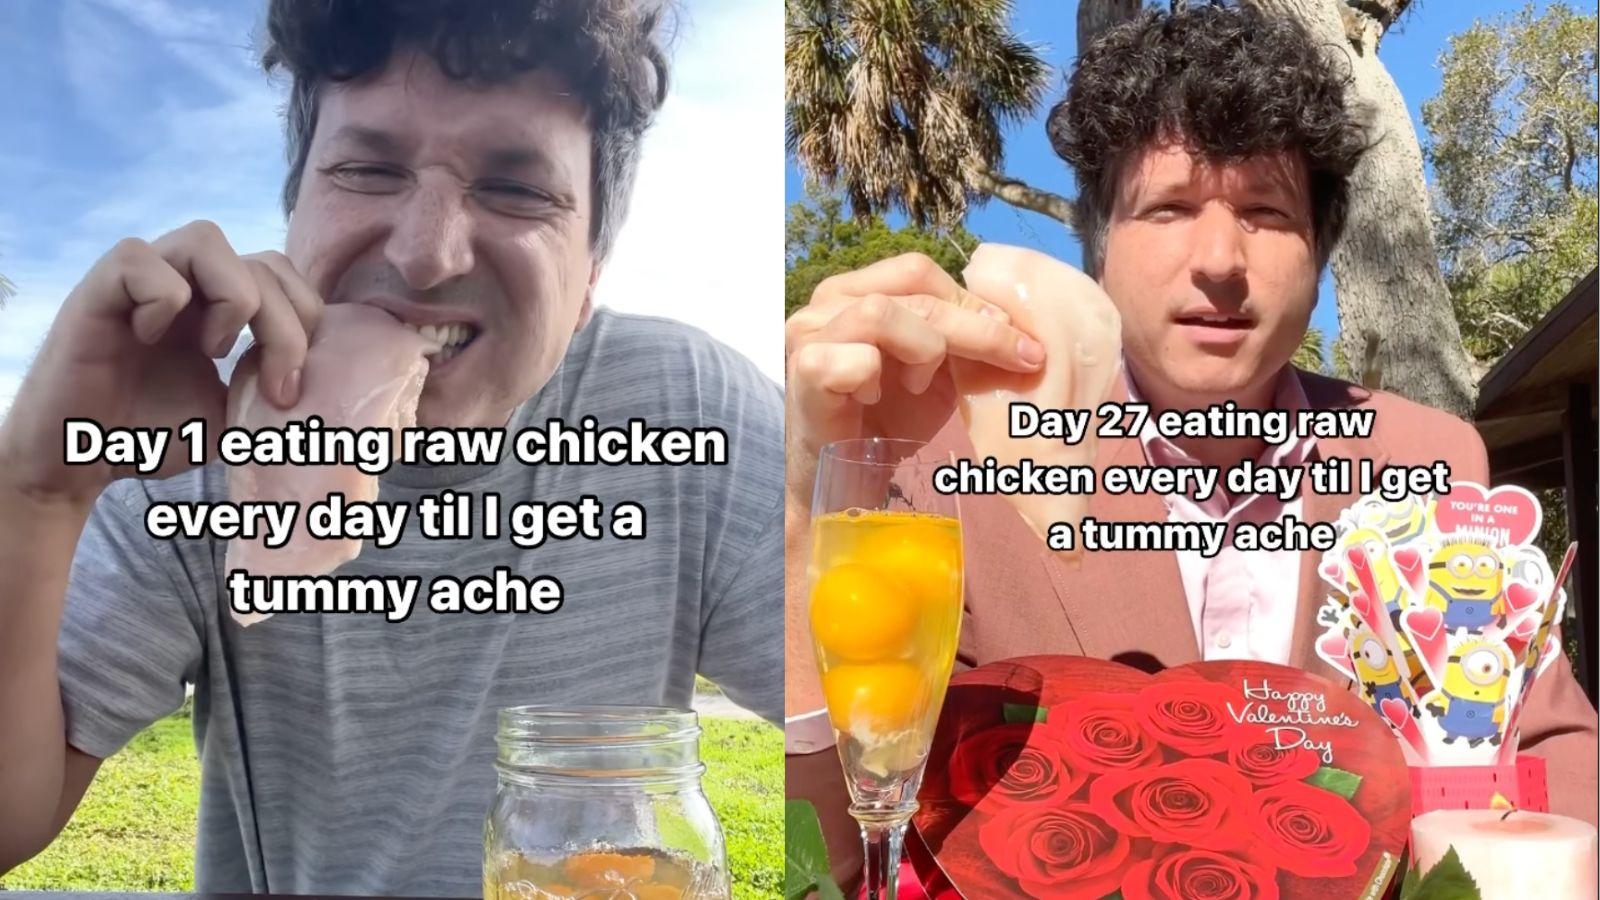 A man is eating raw chicken every day for 100 days